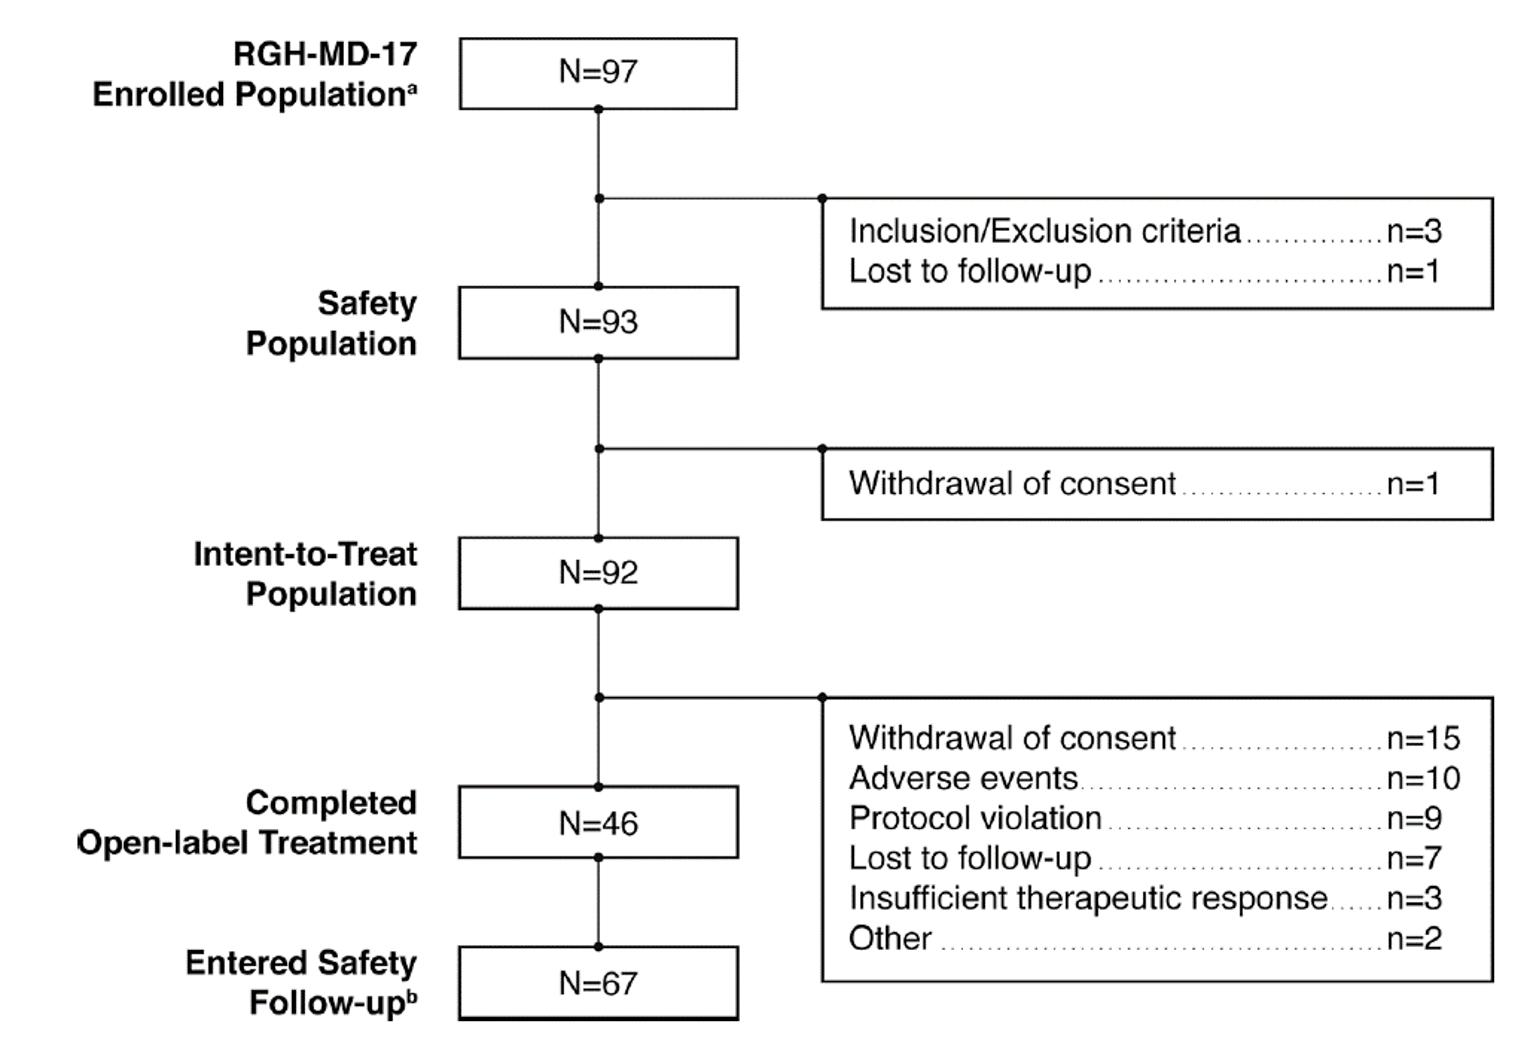 There were 97 patients who enrolled in Study RGH-MD-17, 93 in the safety population and 92 in the mITT population, 46 completed open-label treatment, and 67 entered safety follow-up. The reasons for discontinuation are also presented.